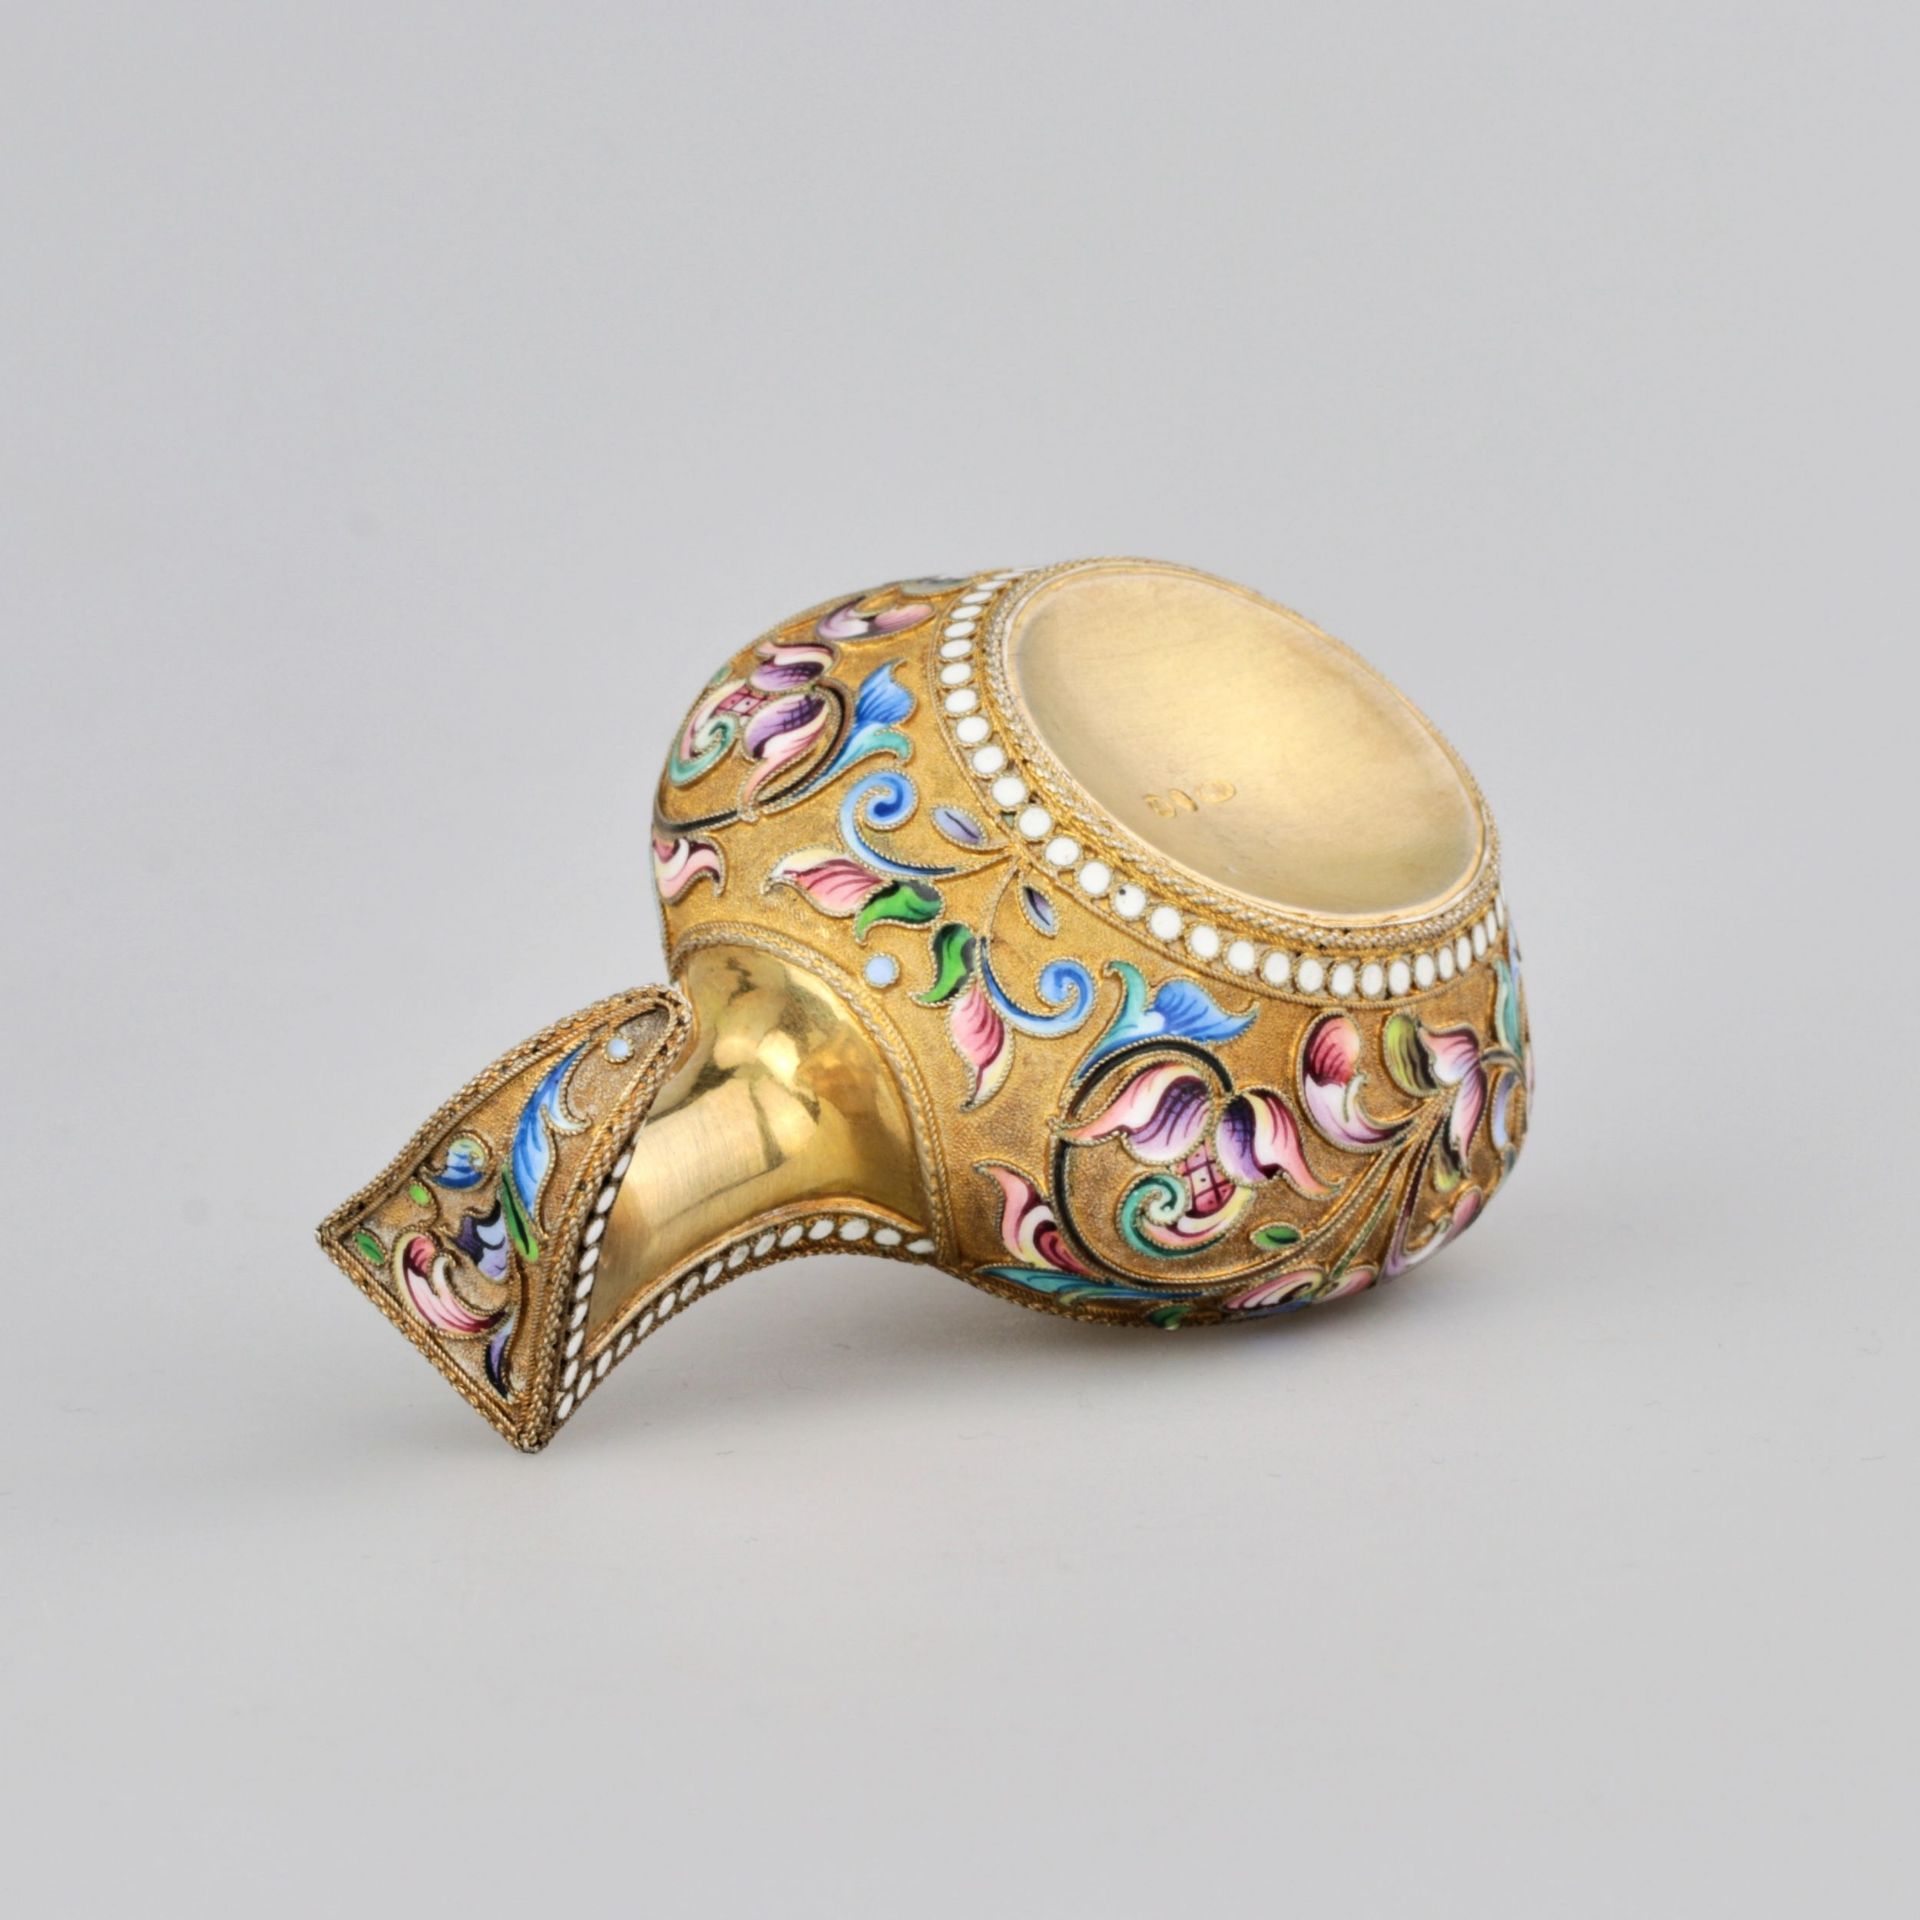 Decorative kovsh in Russian style with enamel. - Image 5 of 6